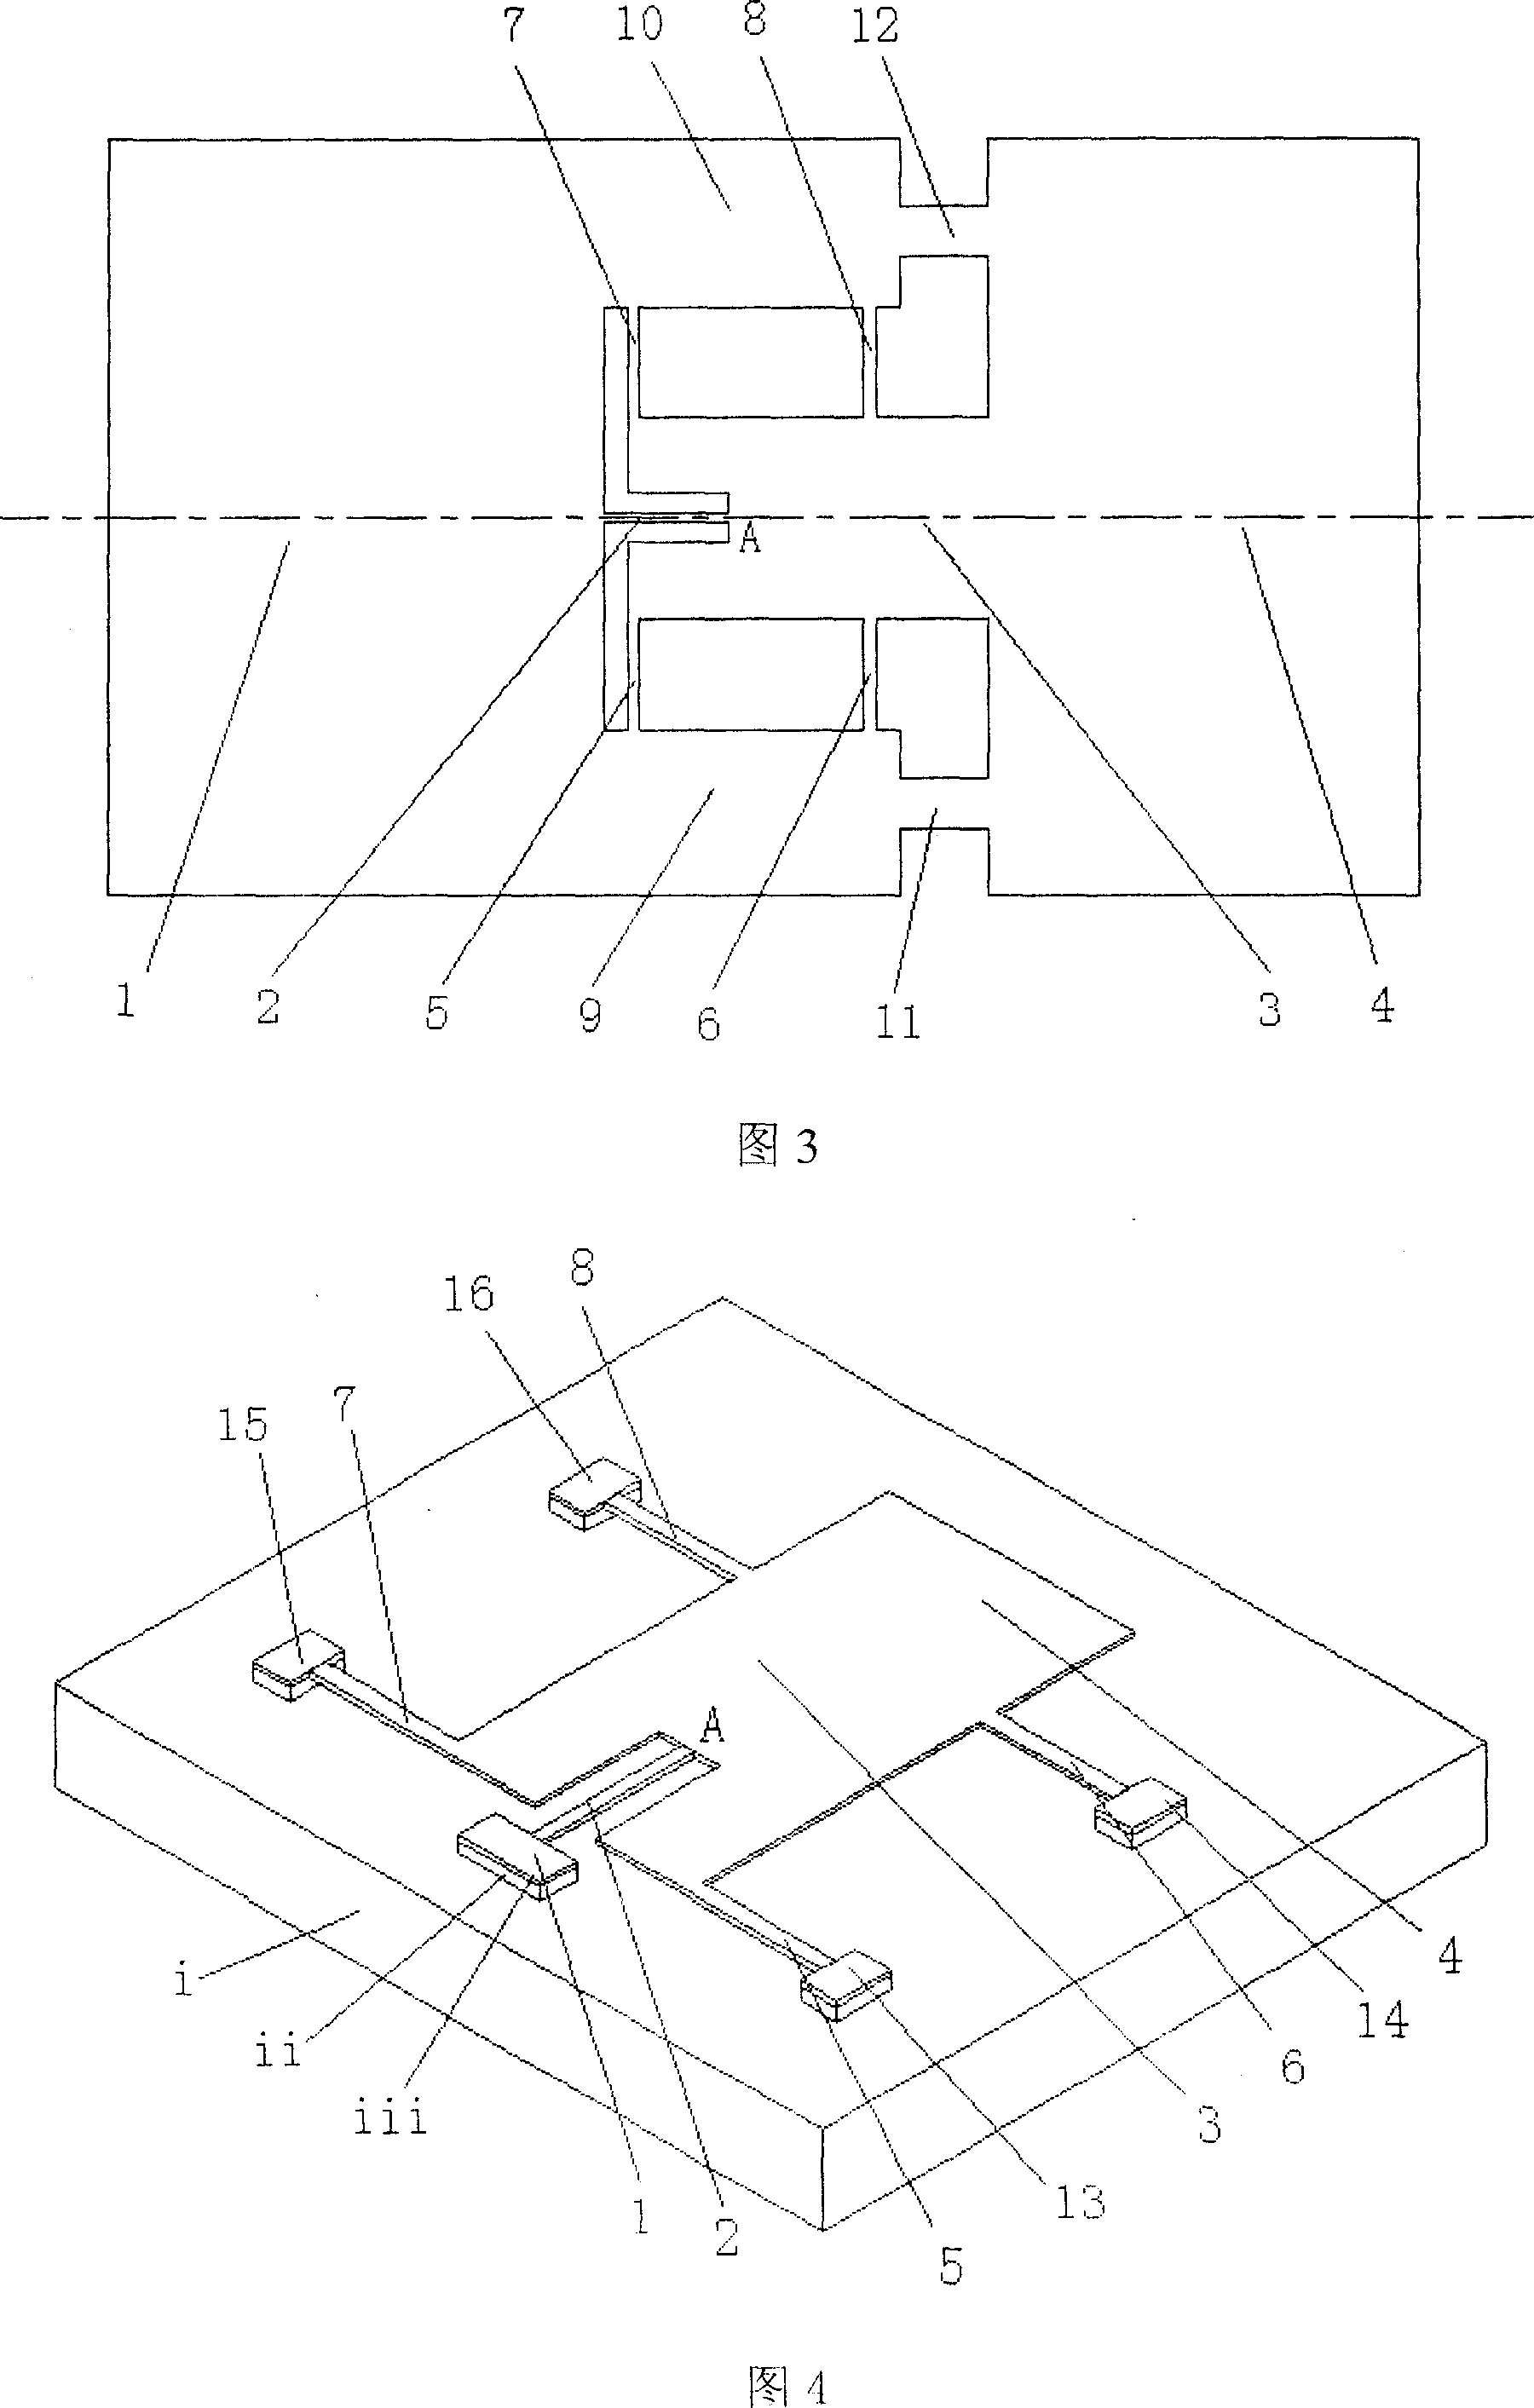 Micro-stretching sample structure with elastic beam